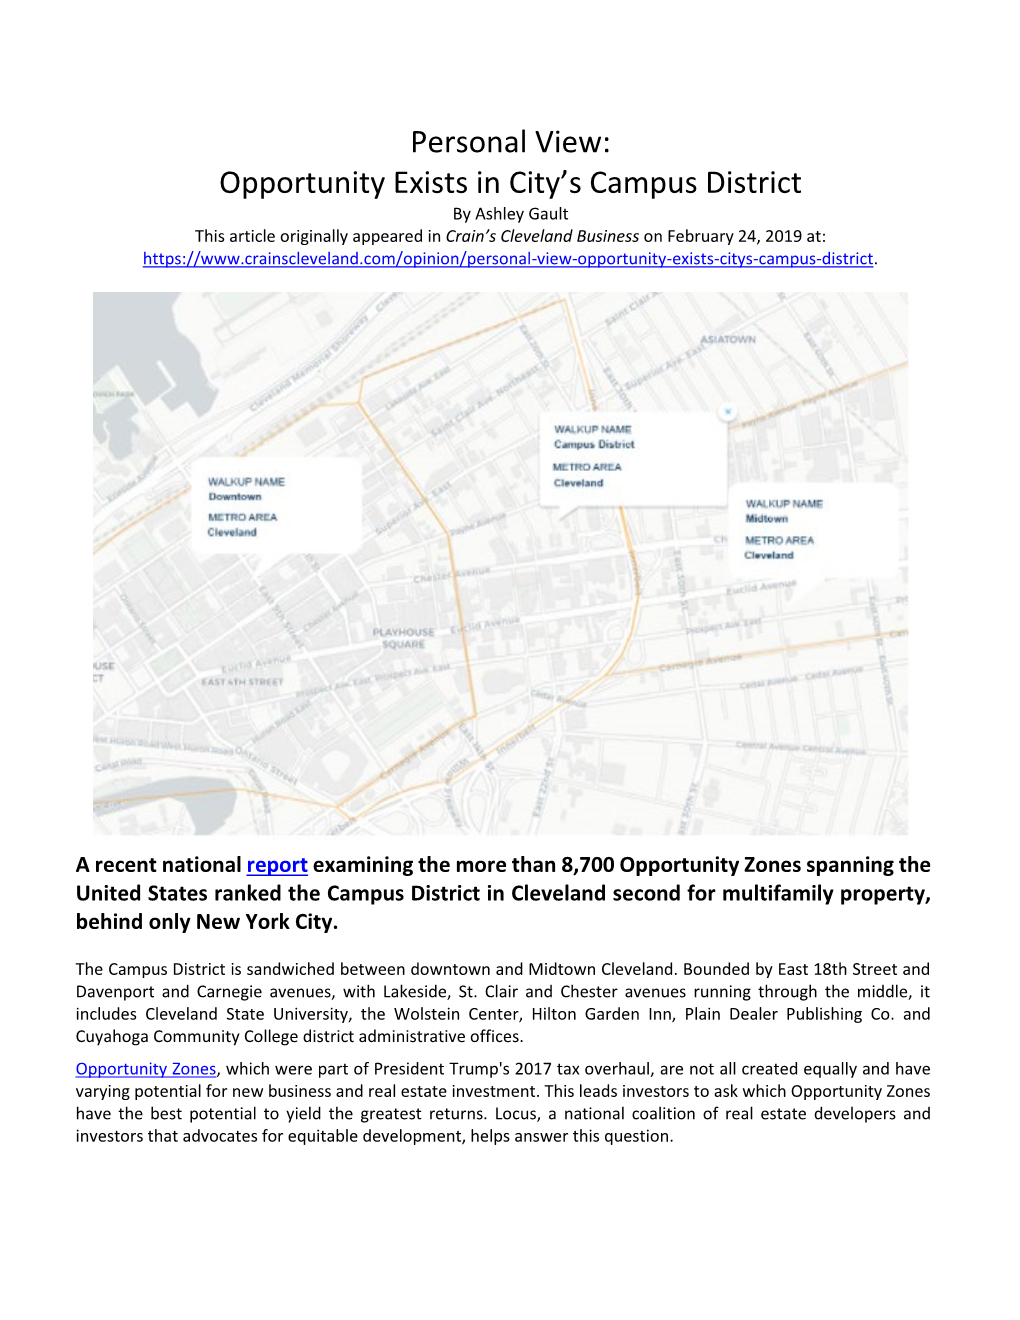 Opportunity Exists in City's Campus District